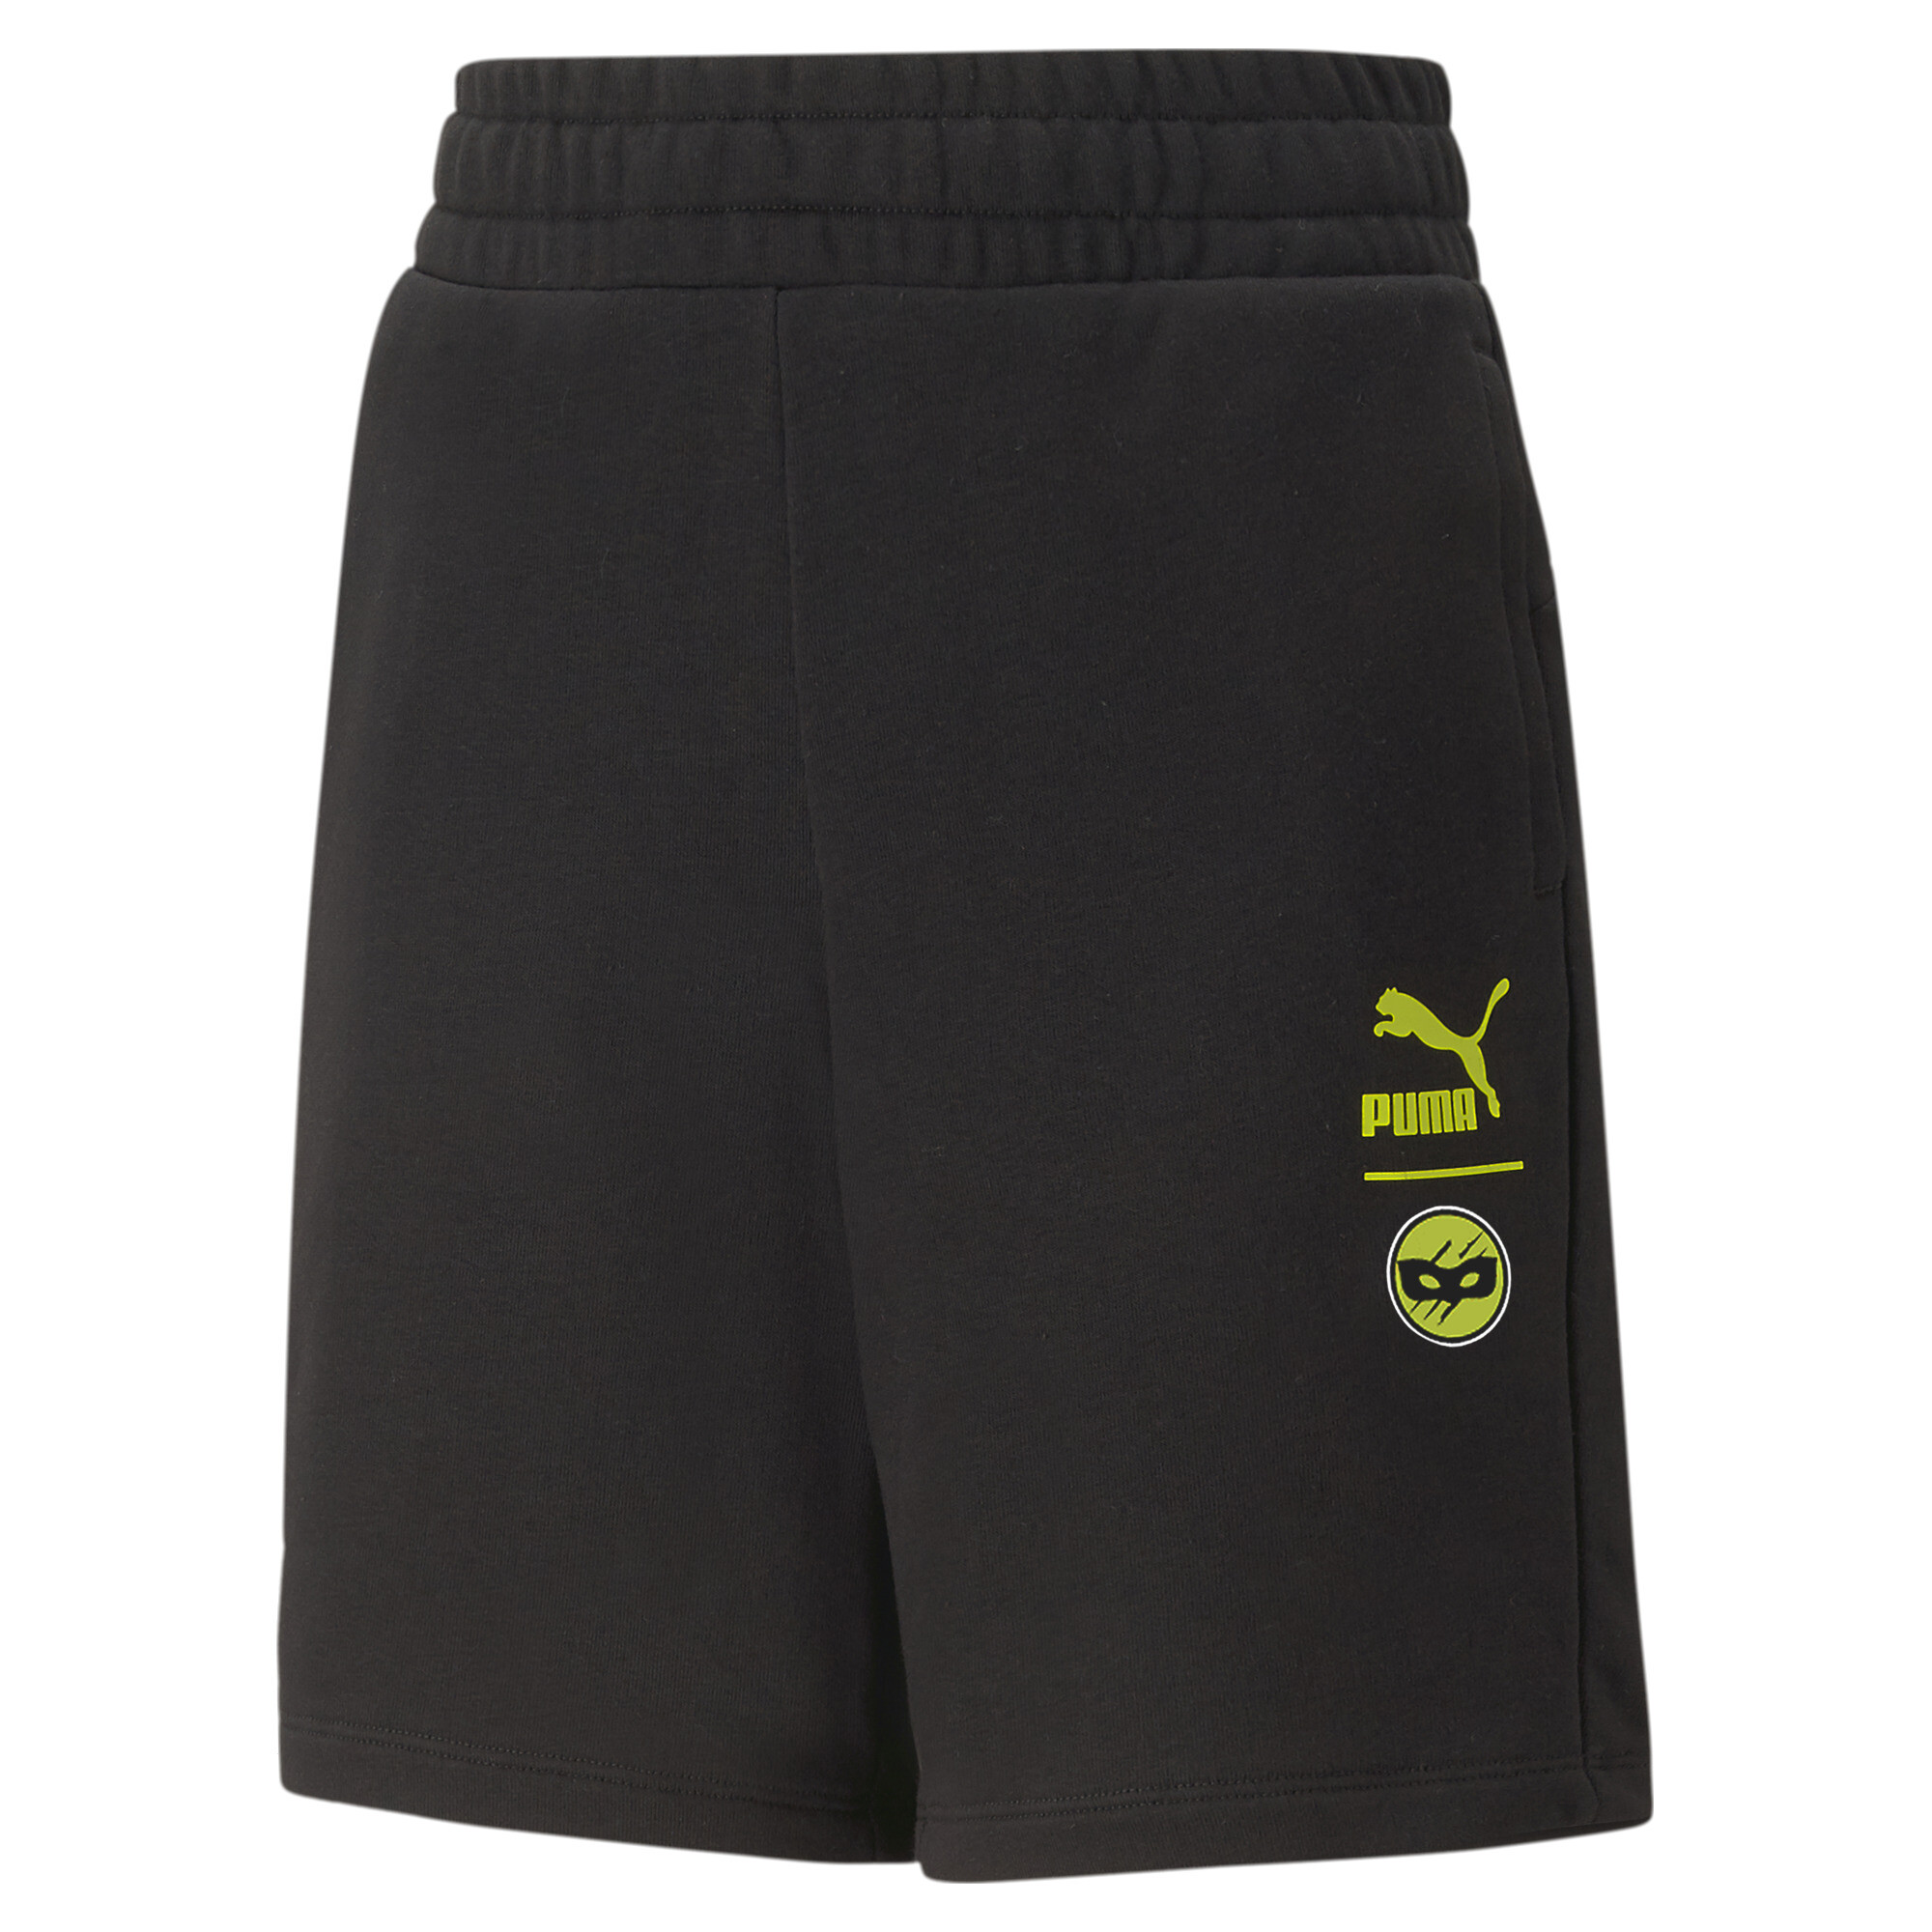 PUMA X MIRACULOUS Shorts In Black, Size 9-10 Youth